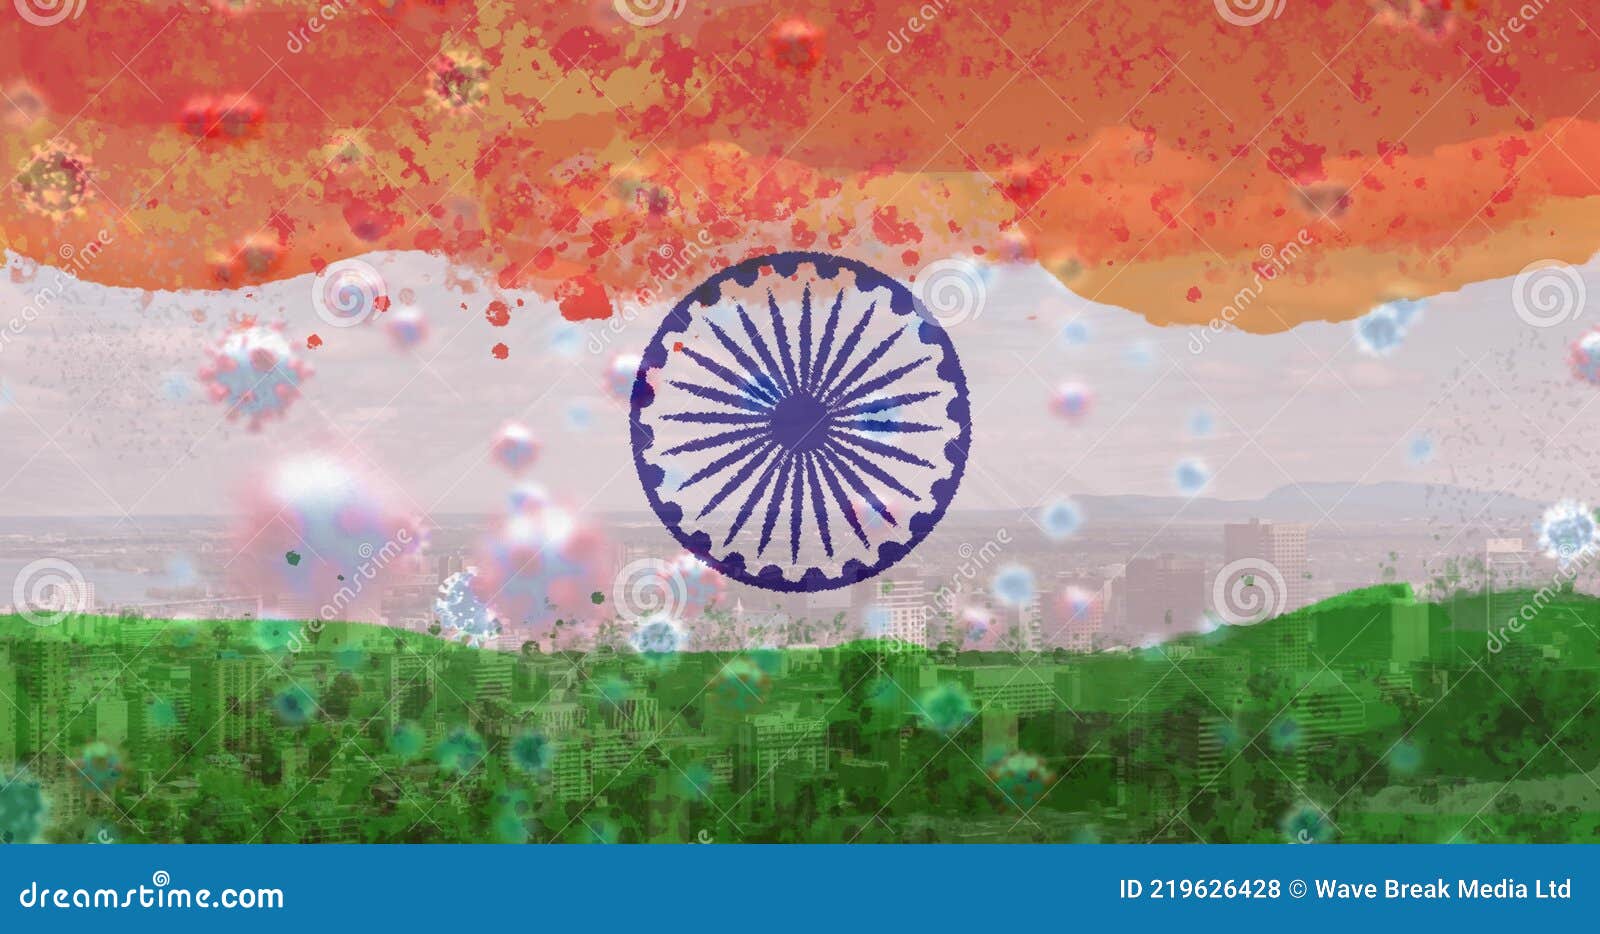 Indian Flag Waving Stock Footage ~ Royalty Free Stock Videos | Page 29